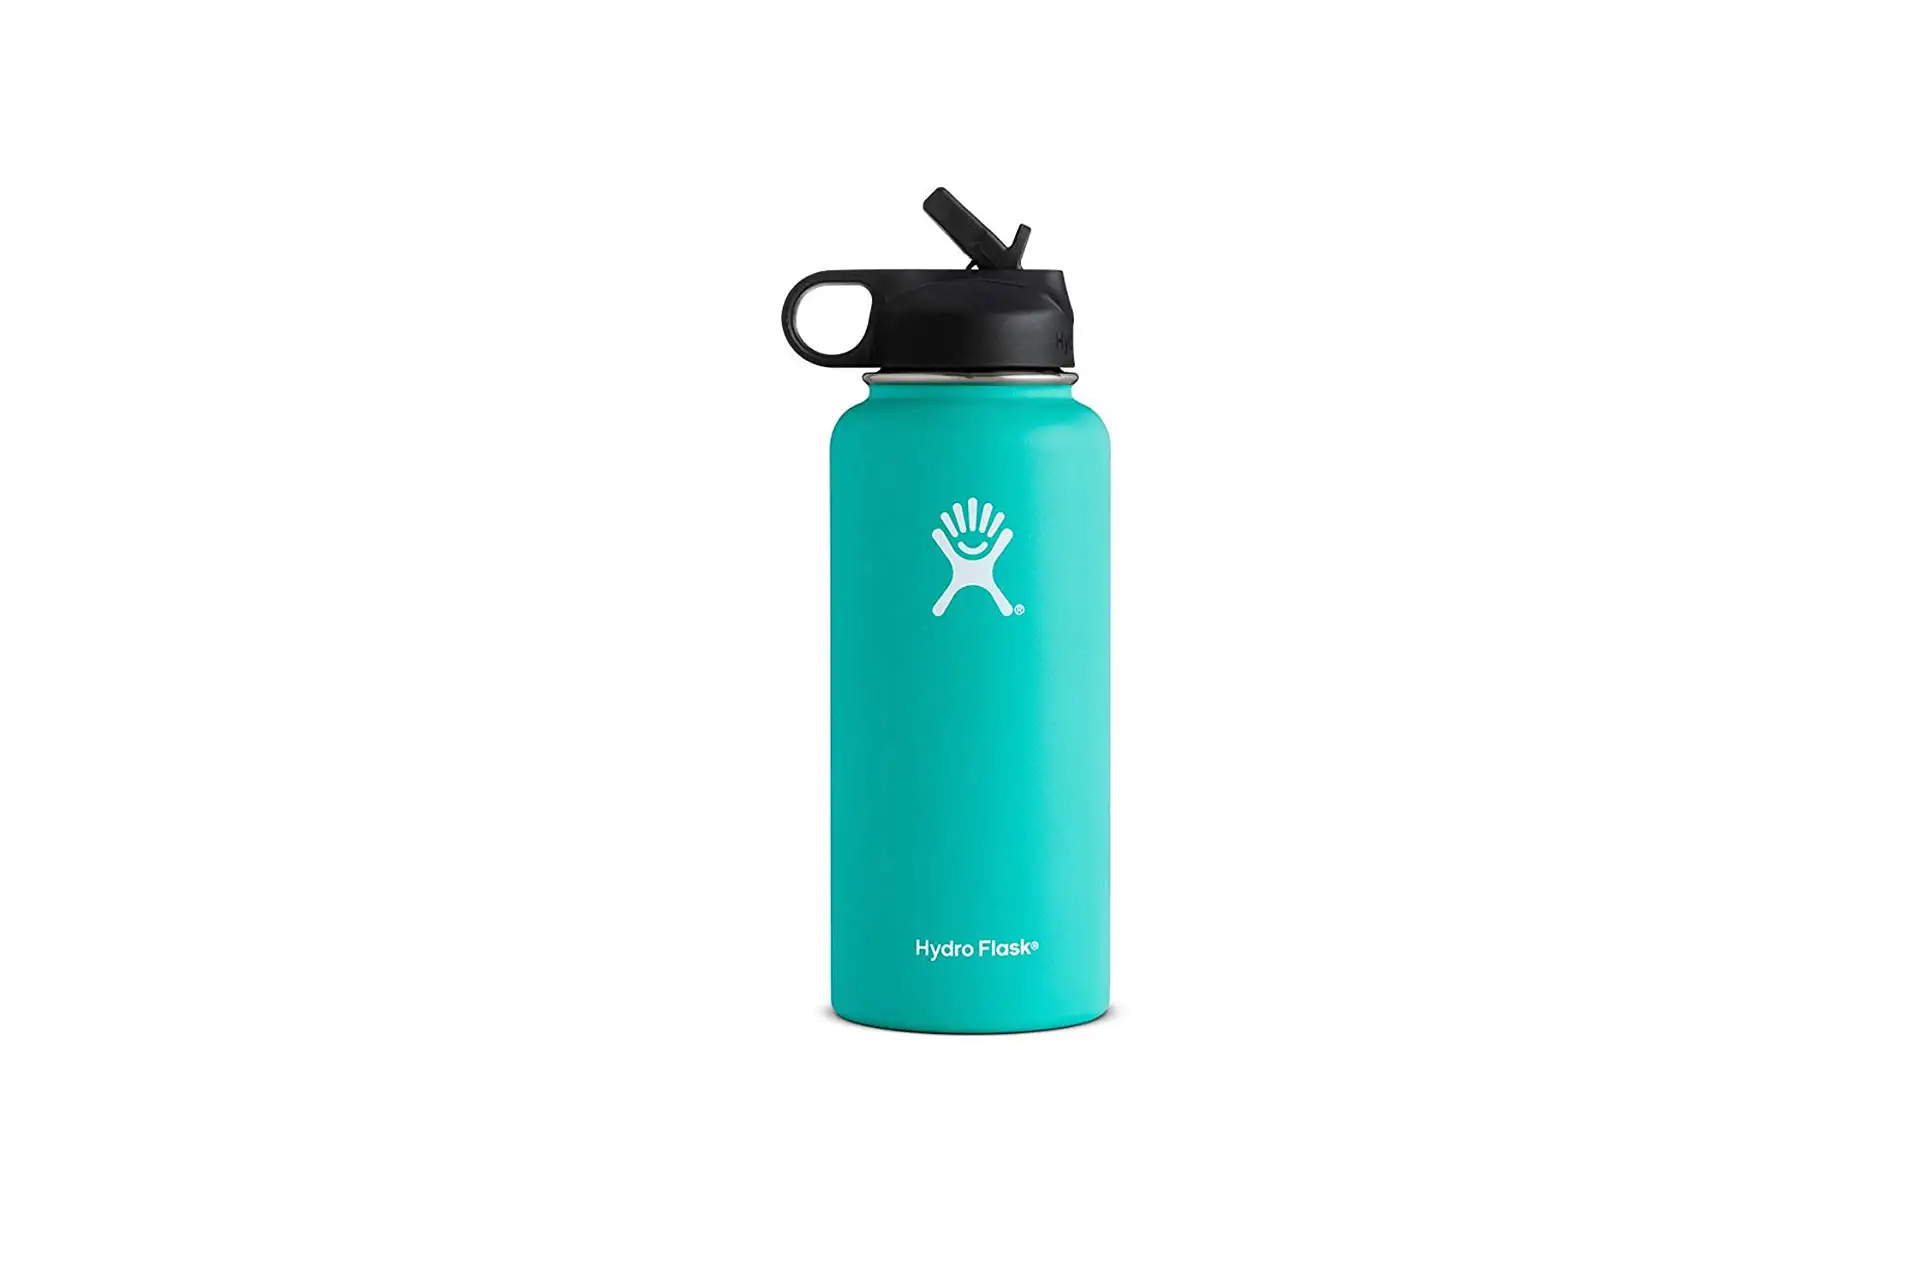 Hydro Flask Water Bottle in Teal; Courtesy of Amazon